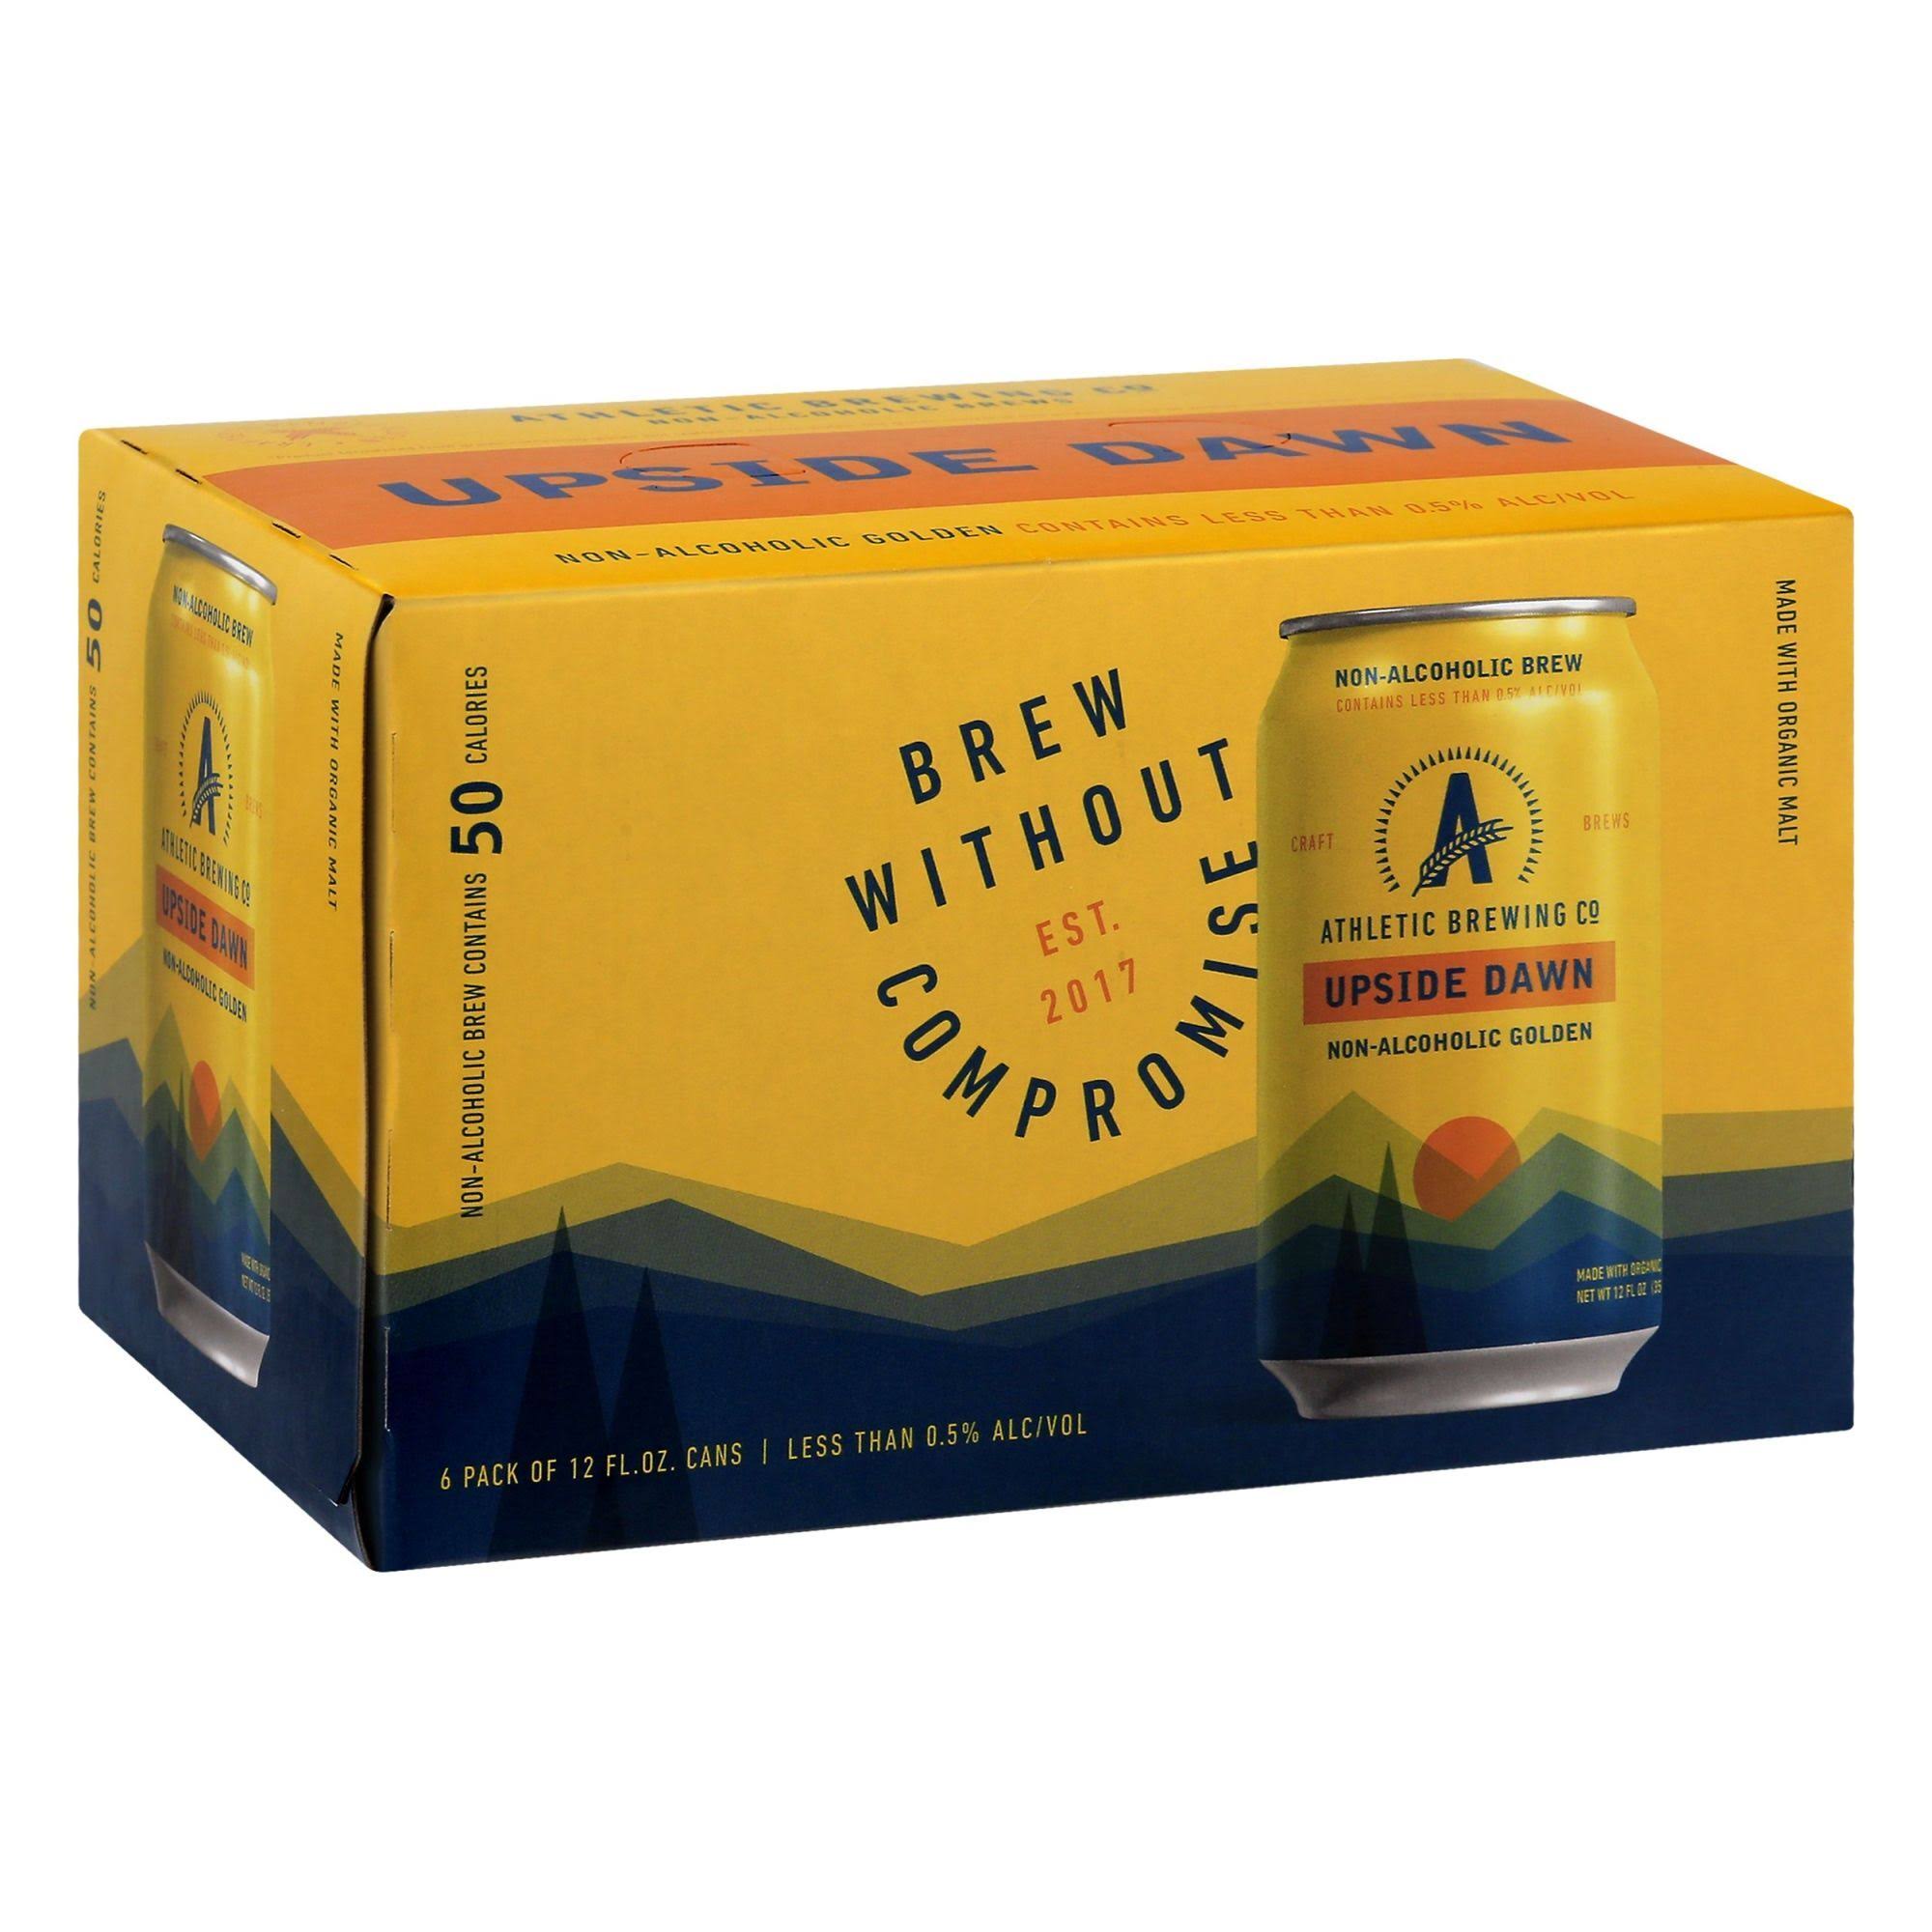 Athletic Brewing Co. Non Alcoholic Golden Beer Upside Dawn